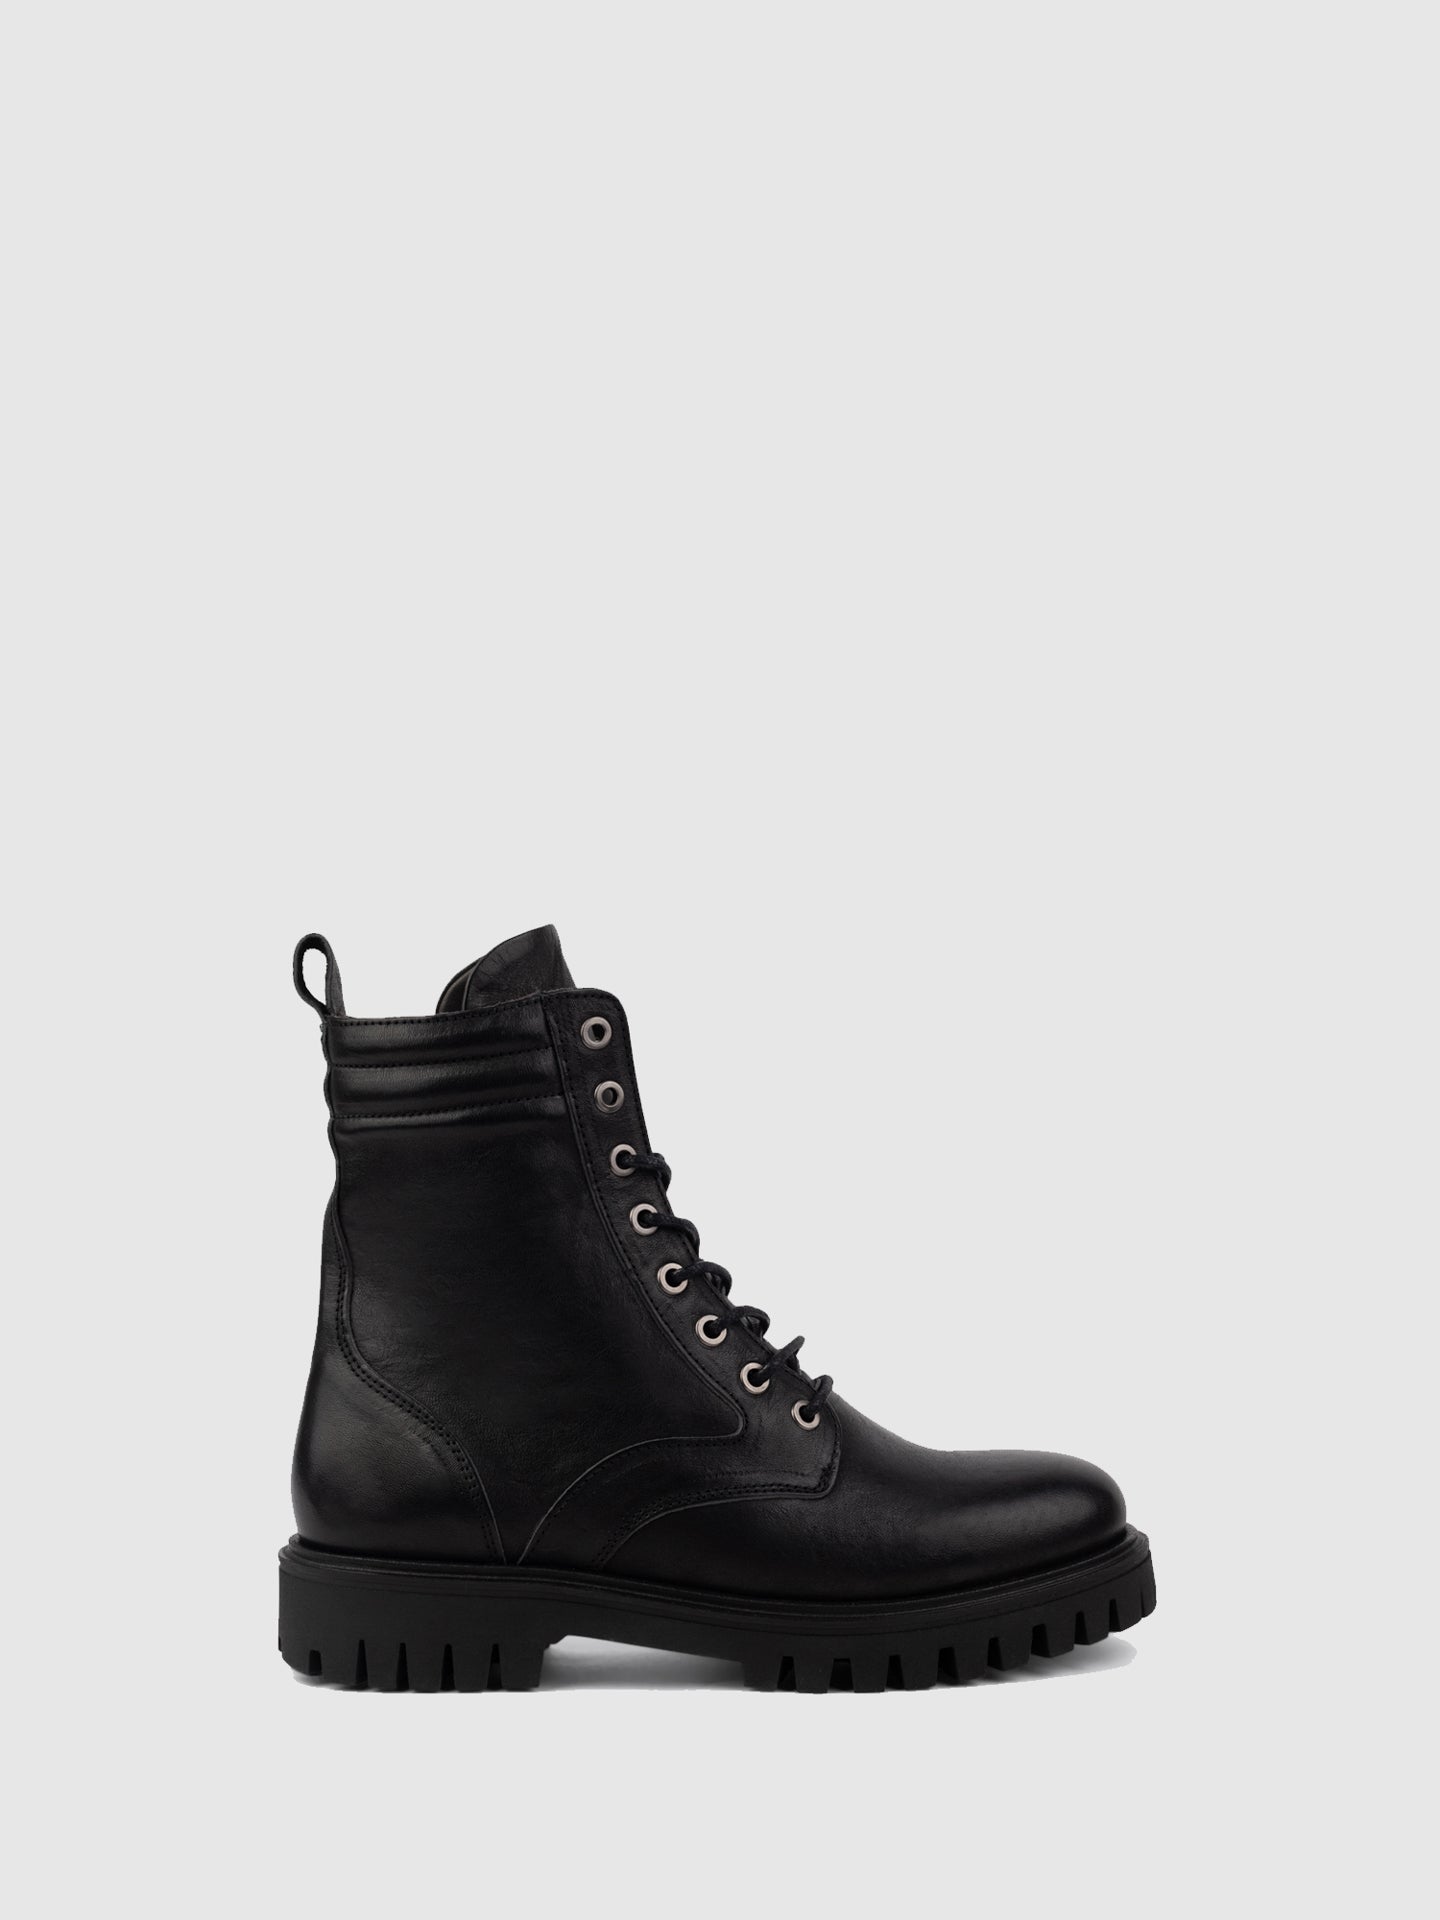 Only2me Black Round Toe Boots